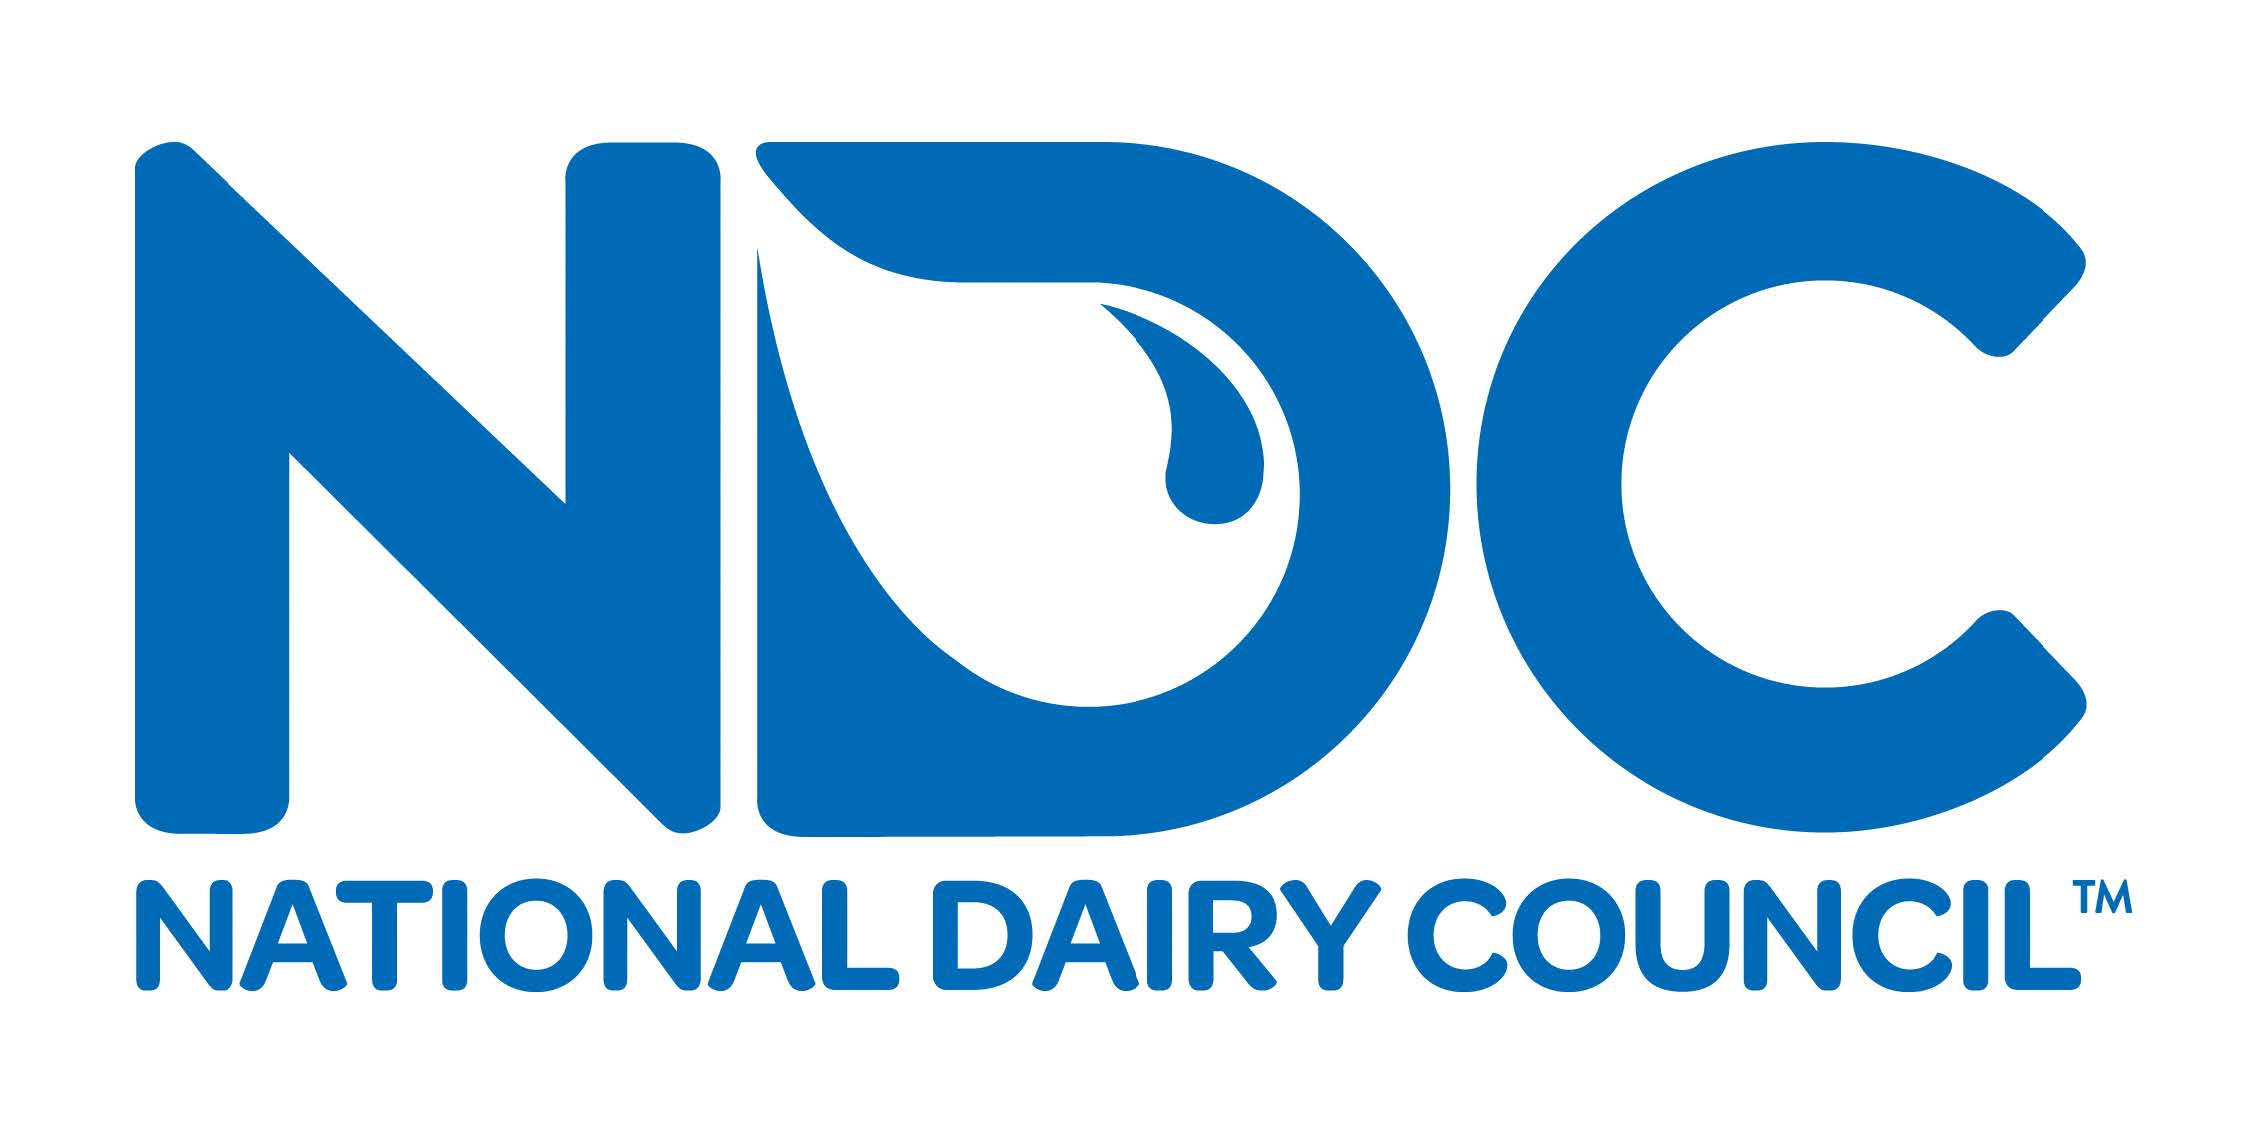 National Dairy Council Communicates Dairy's Nutrition, Sustainability Story Ahead of UN Summit